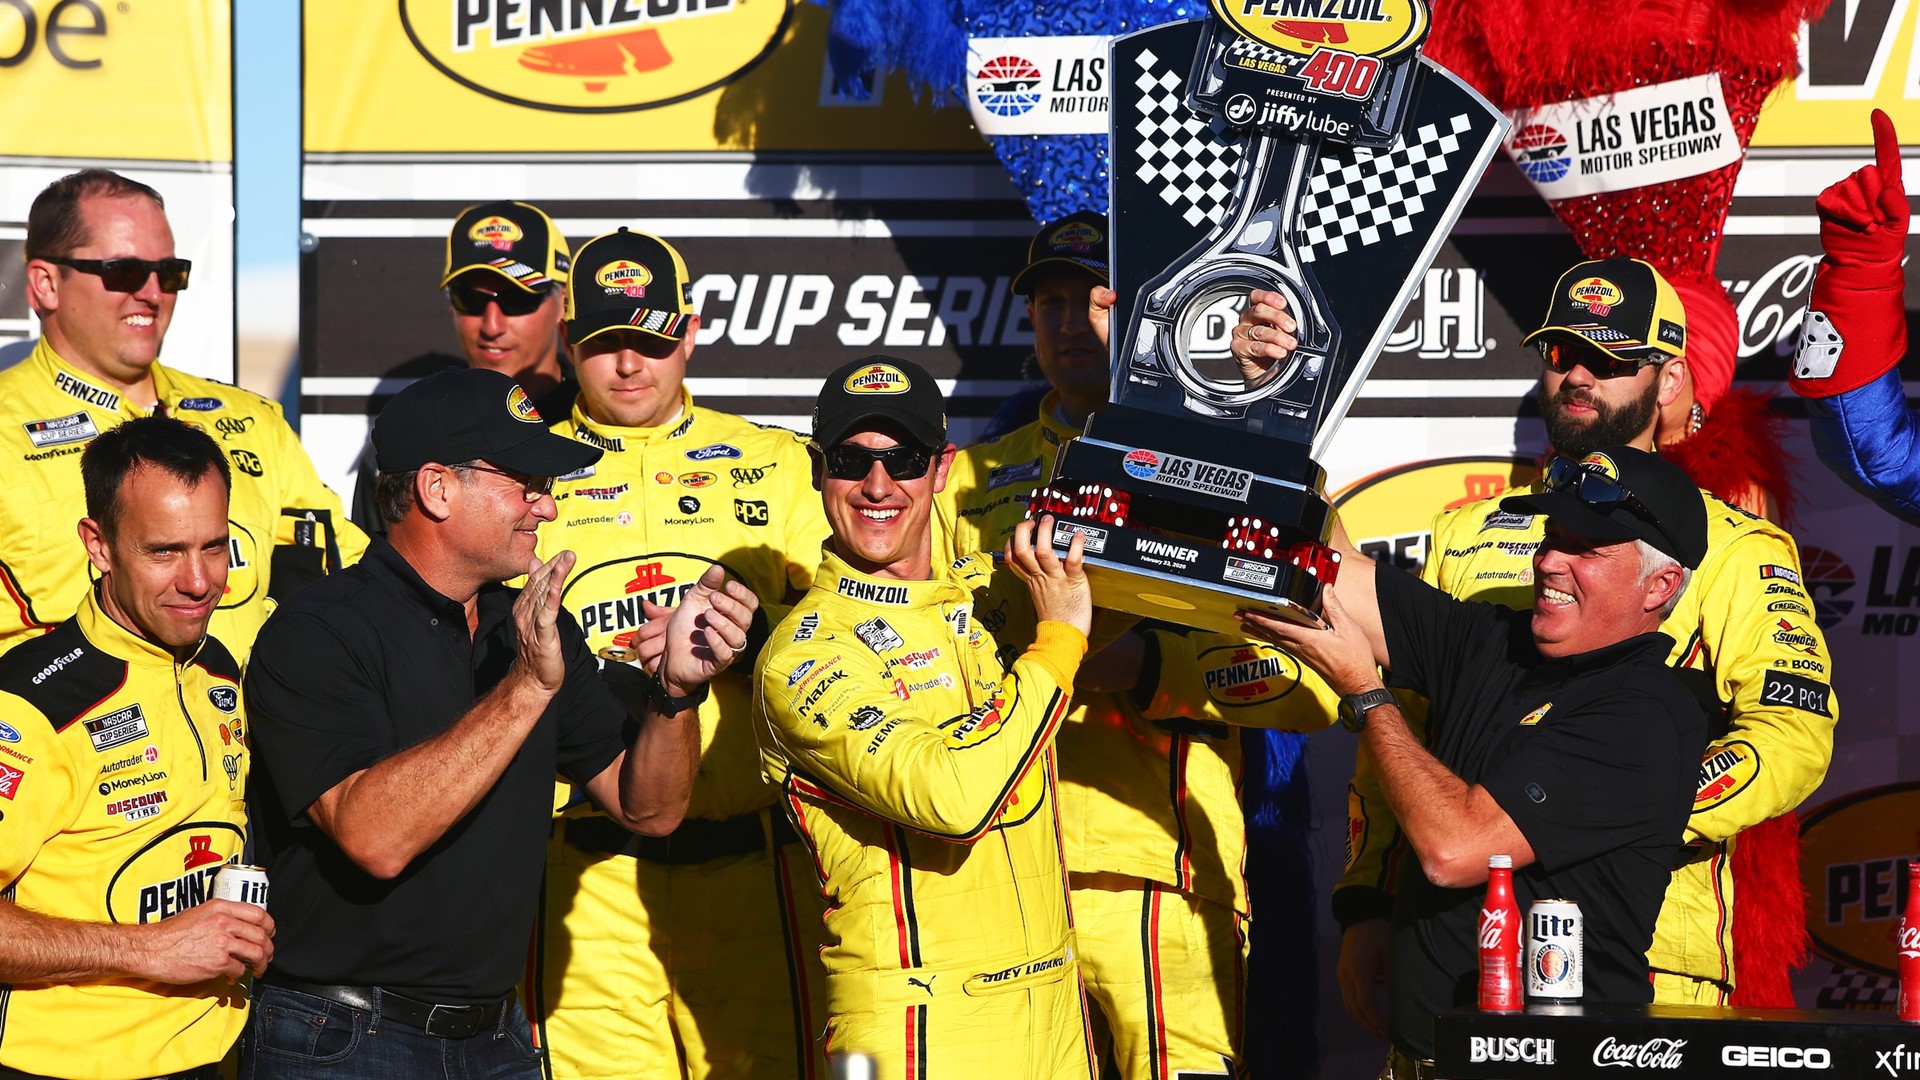 Joey Logano (22) is presented with a trophy after winning the NASCAR Cup Series Pennzoil 400